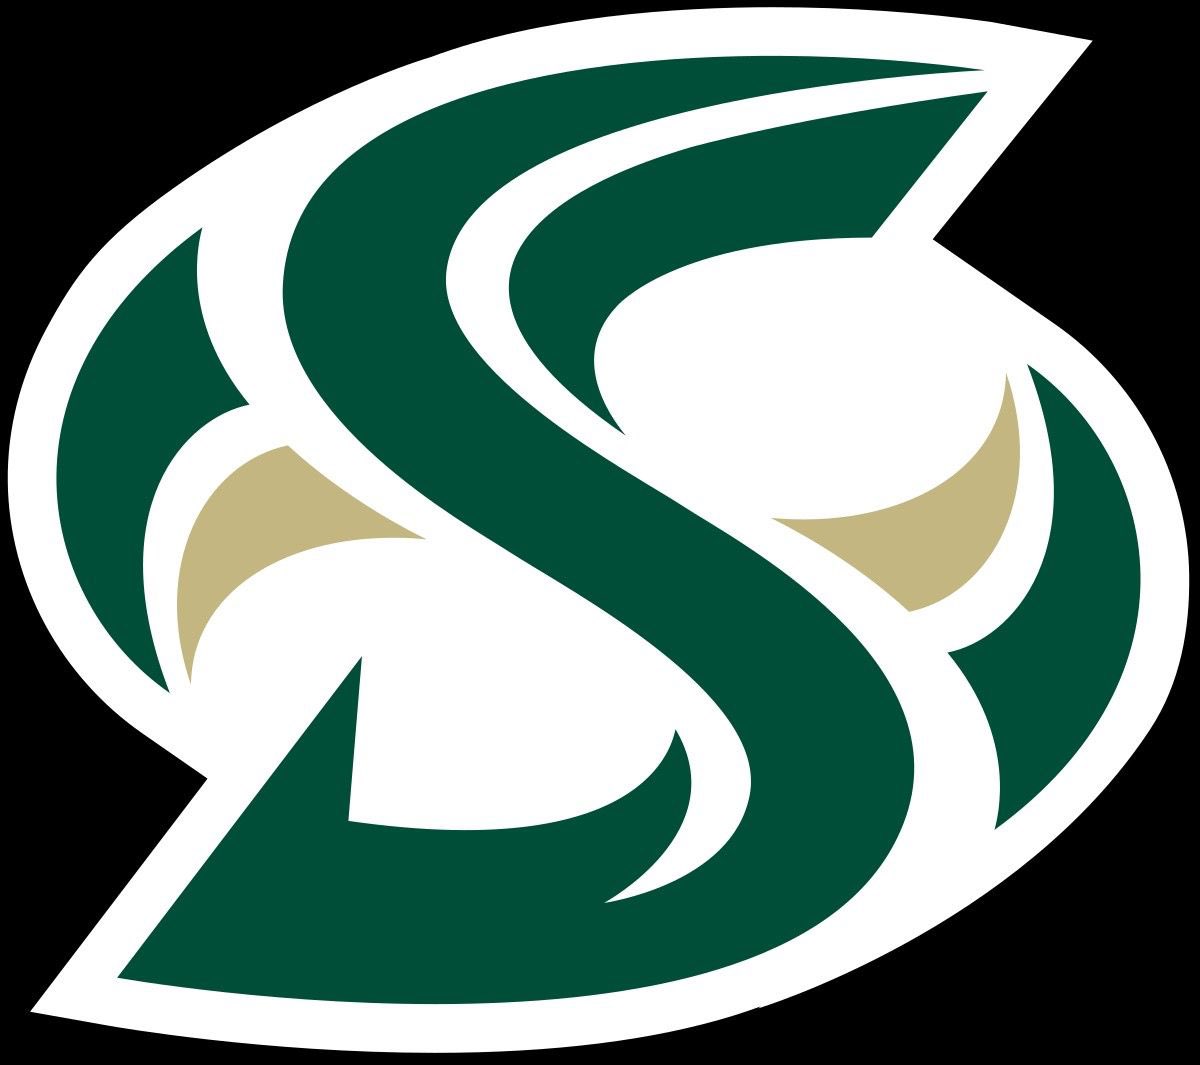 Blessed to have received an offer from Sac st university! @CoachCherokee @KColmon